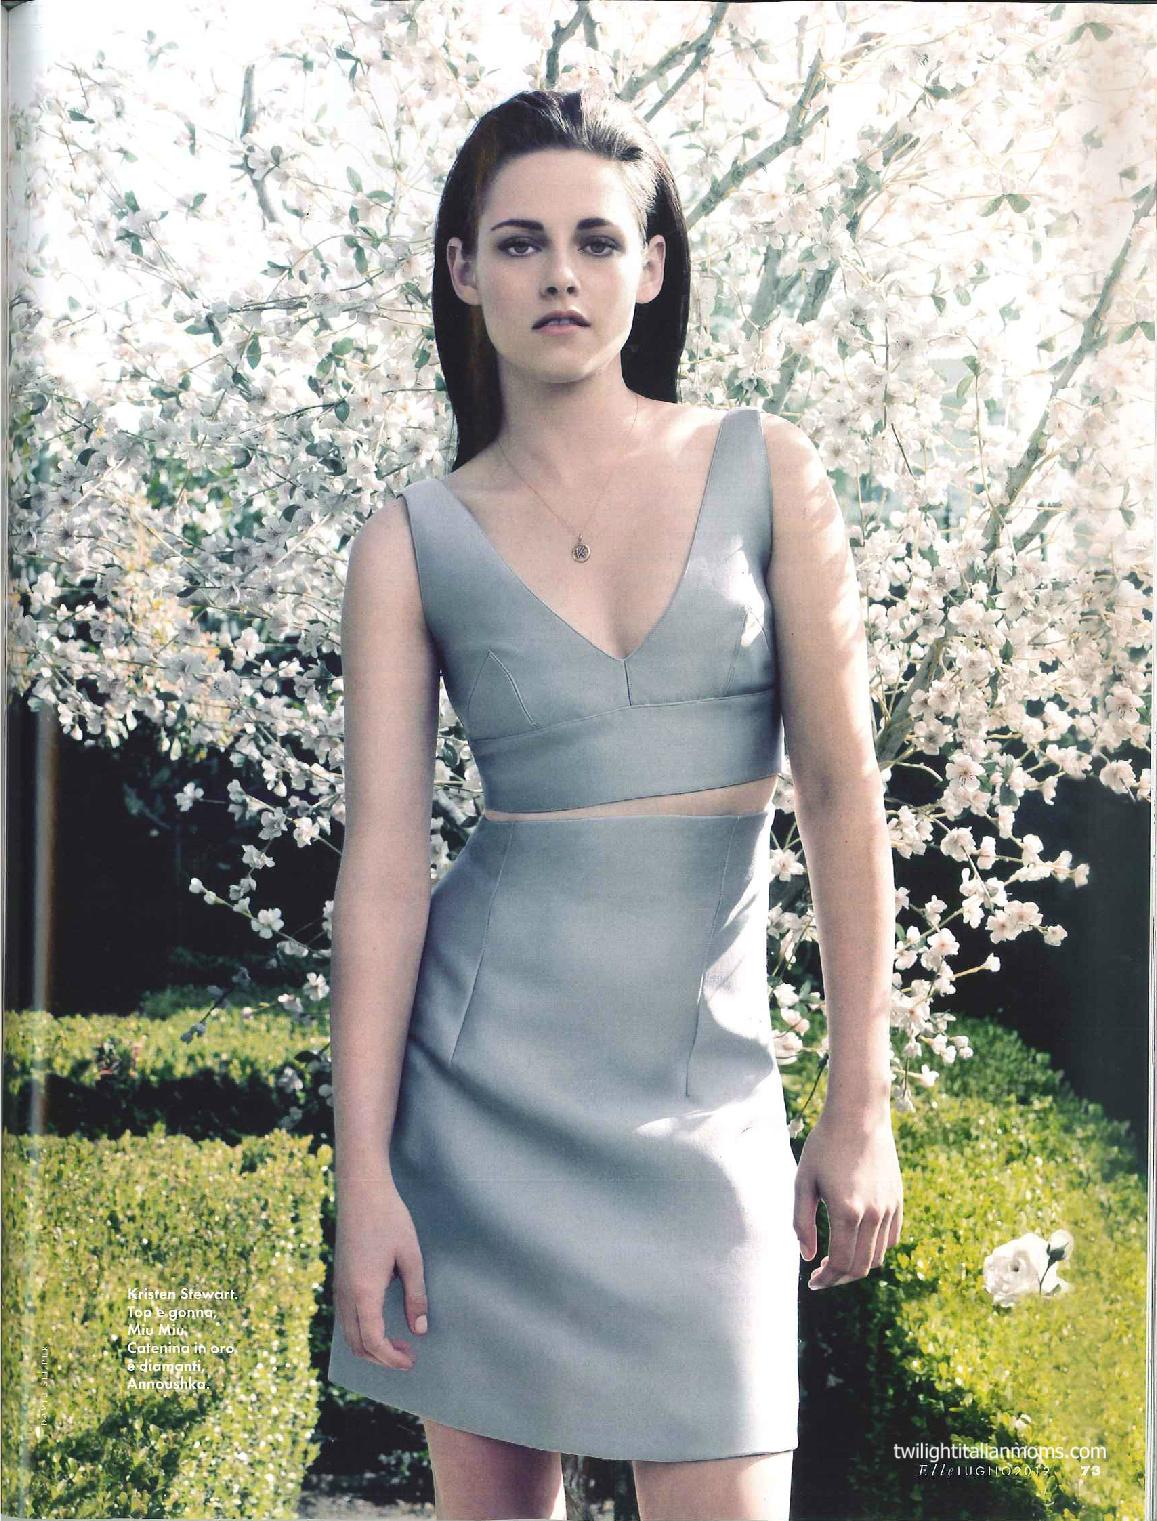 75+ Hot Pictures Of Kristen Stewart Are Epitome Of Sexiness | Best Of Comic Books